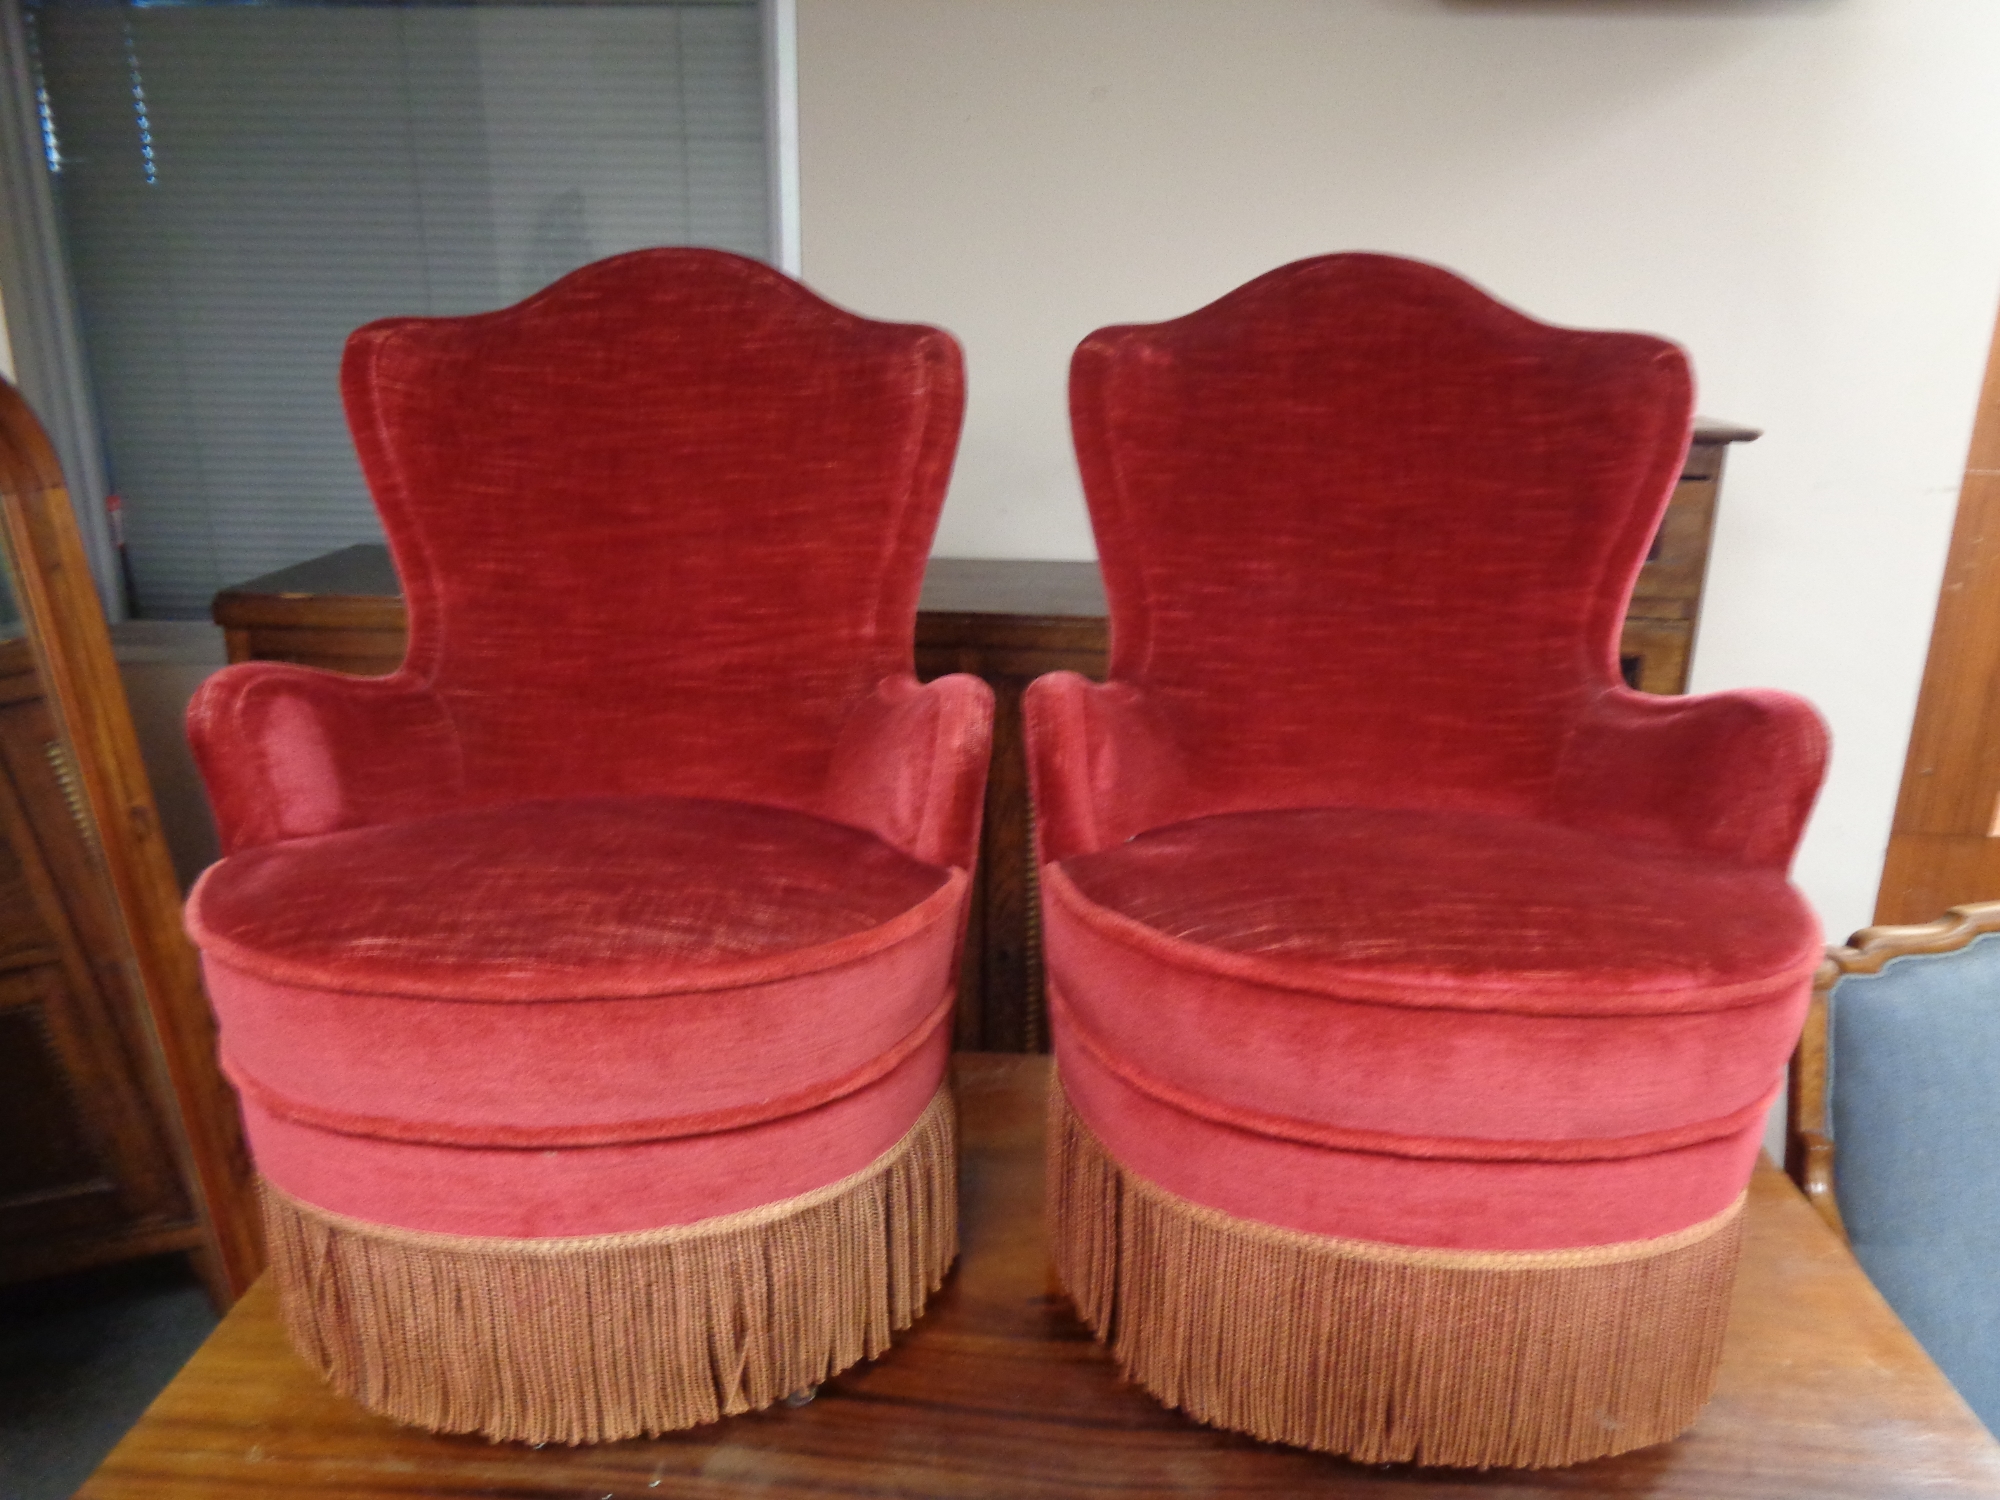 A pair of salon armchairs in red tasselled upholstery